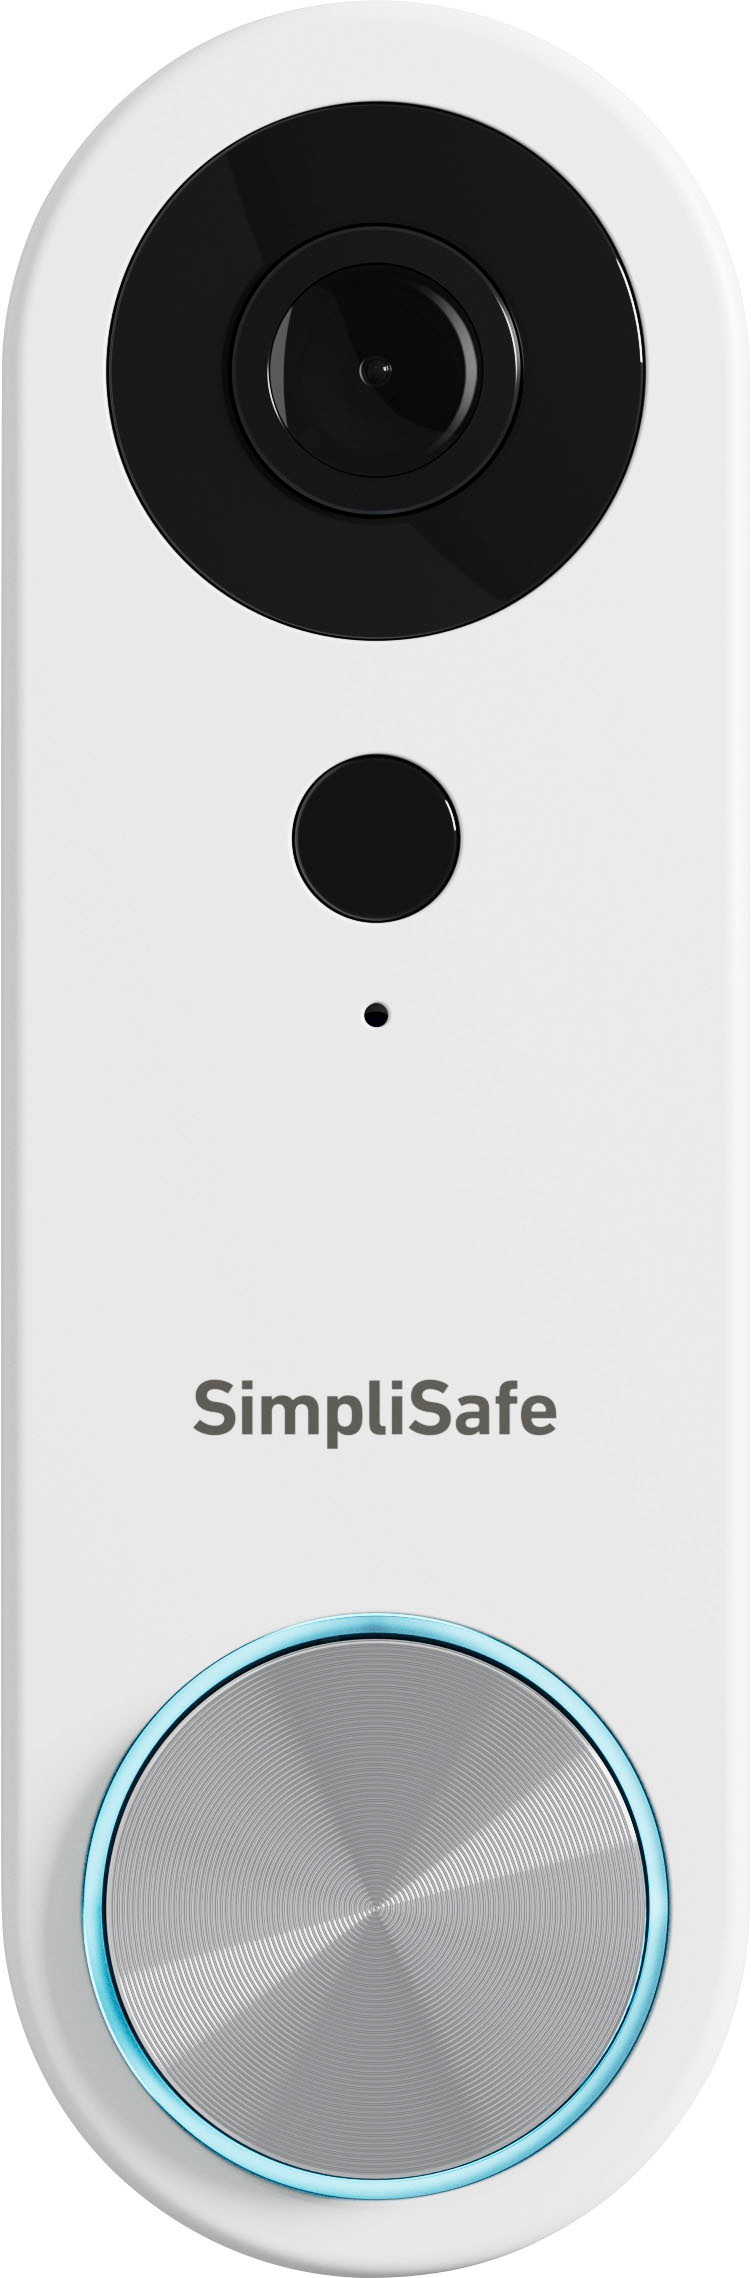 SimpliSafe Pro Video Doorbell Wired 